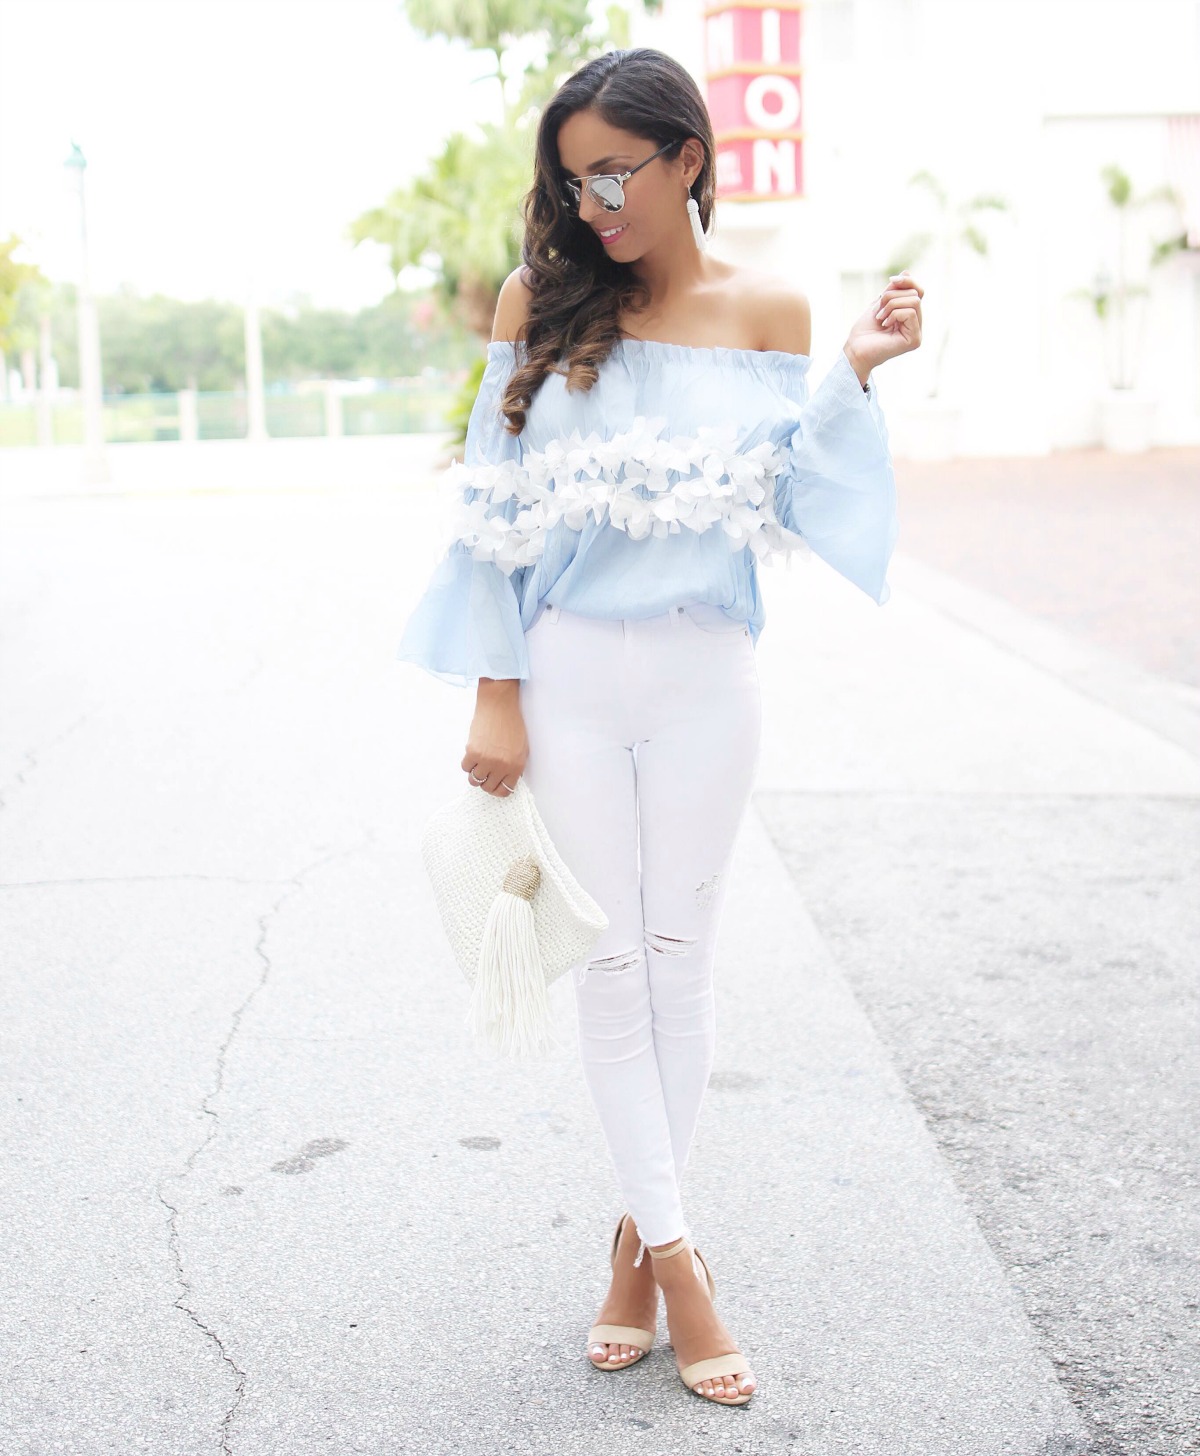 Light blue off the shoulder top with trimmed flower detail and white jeans